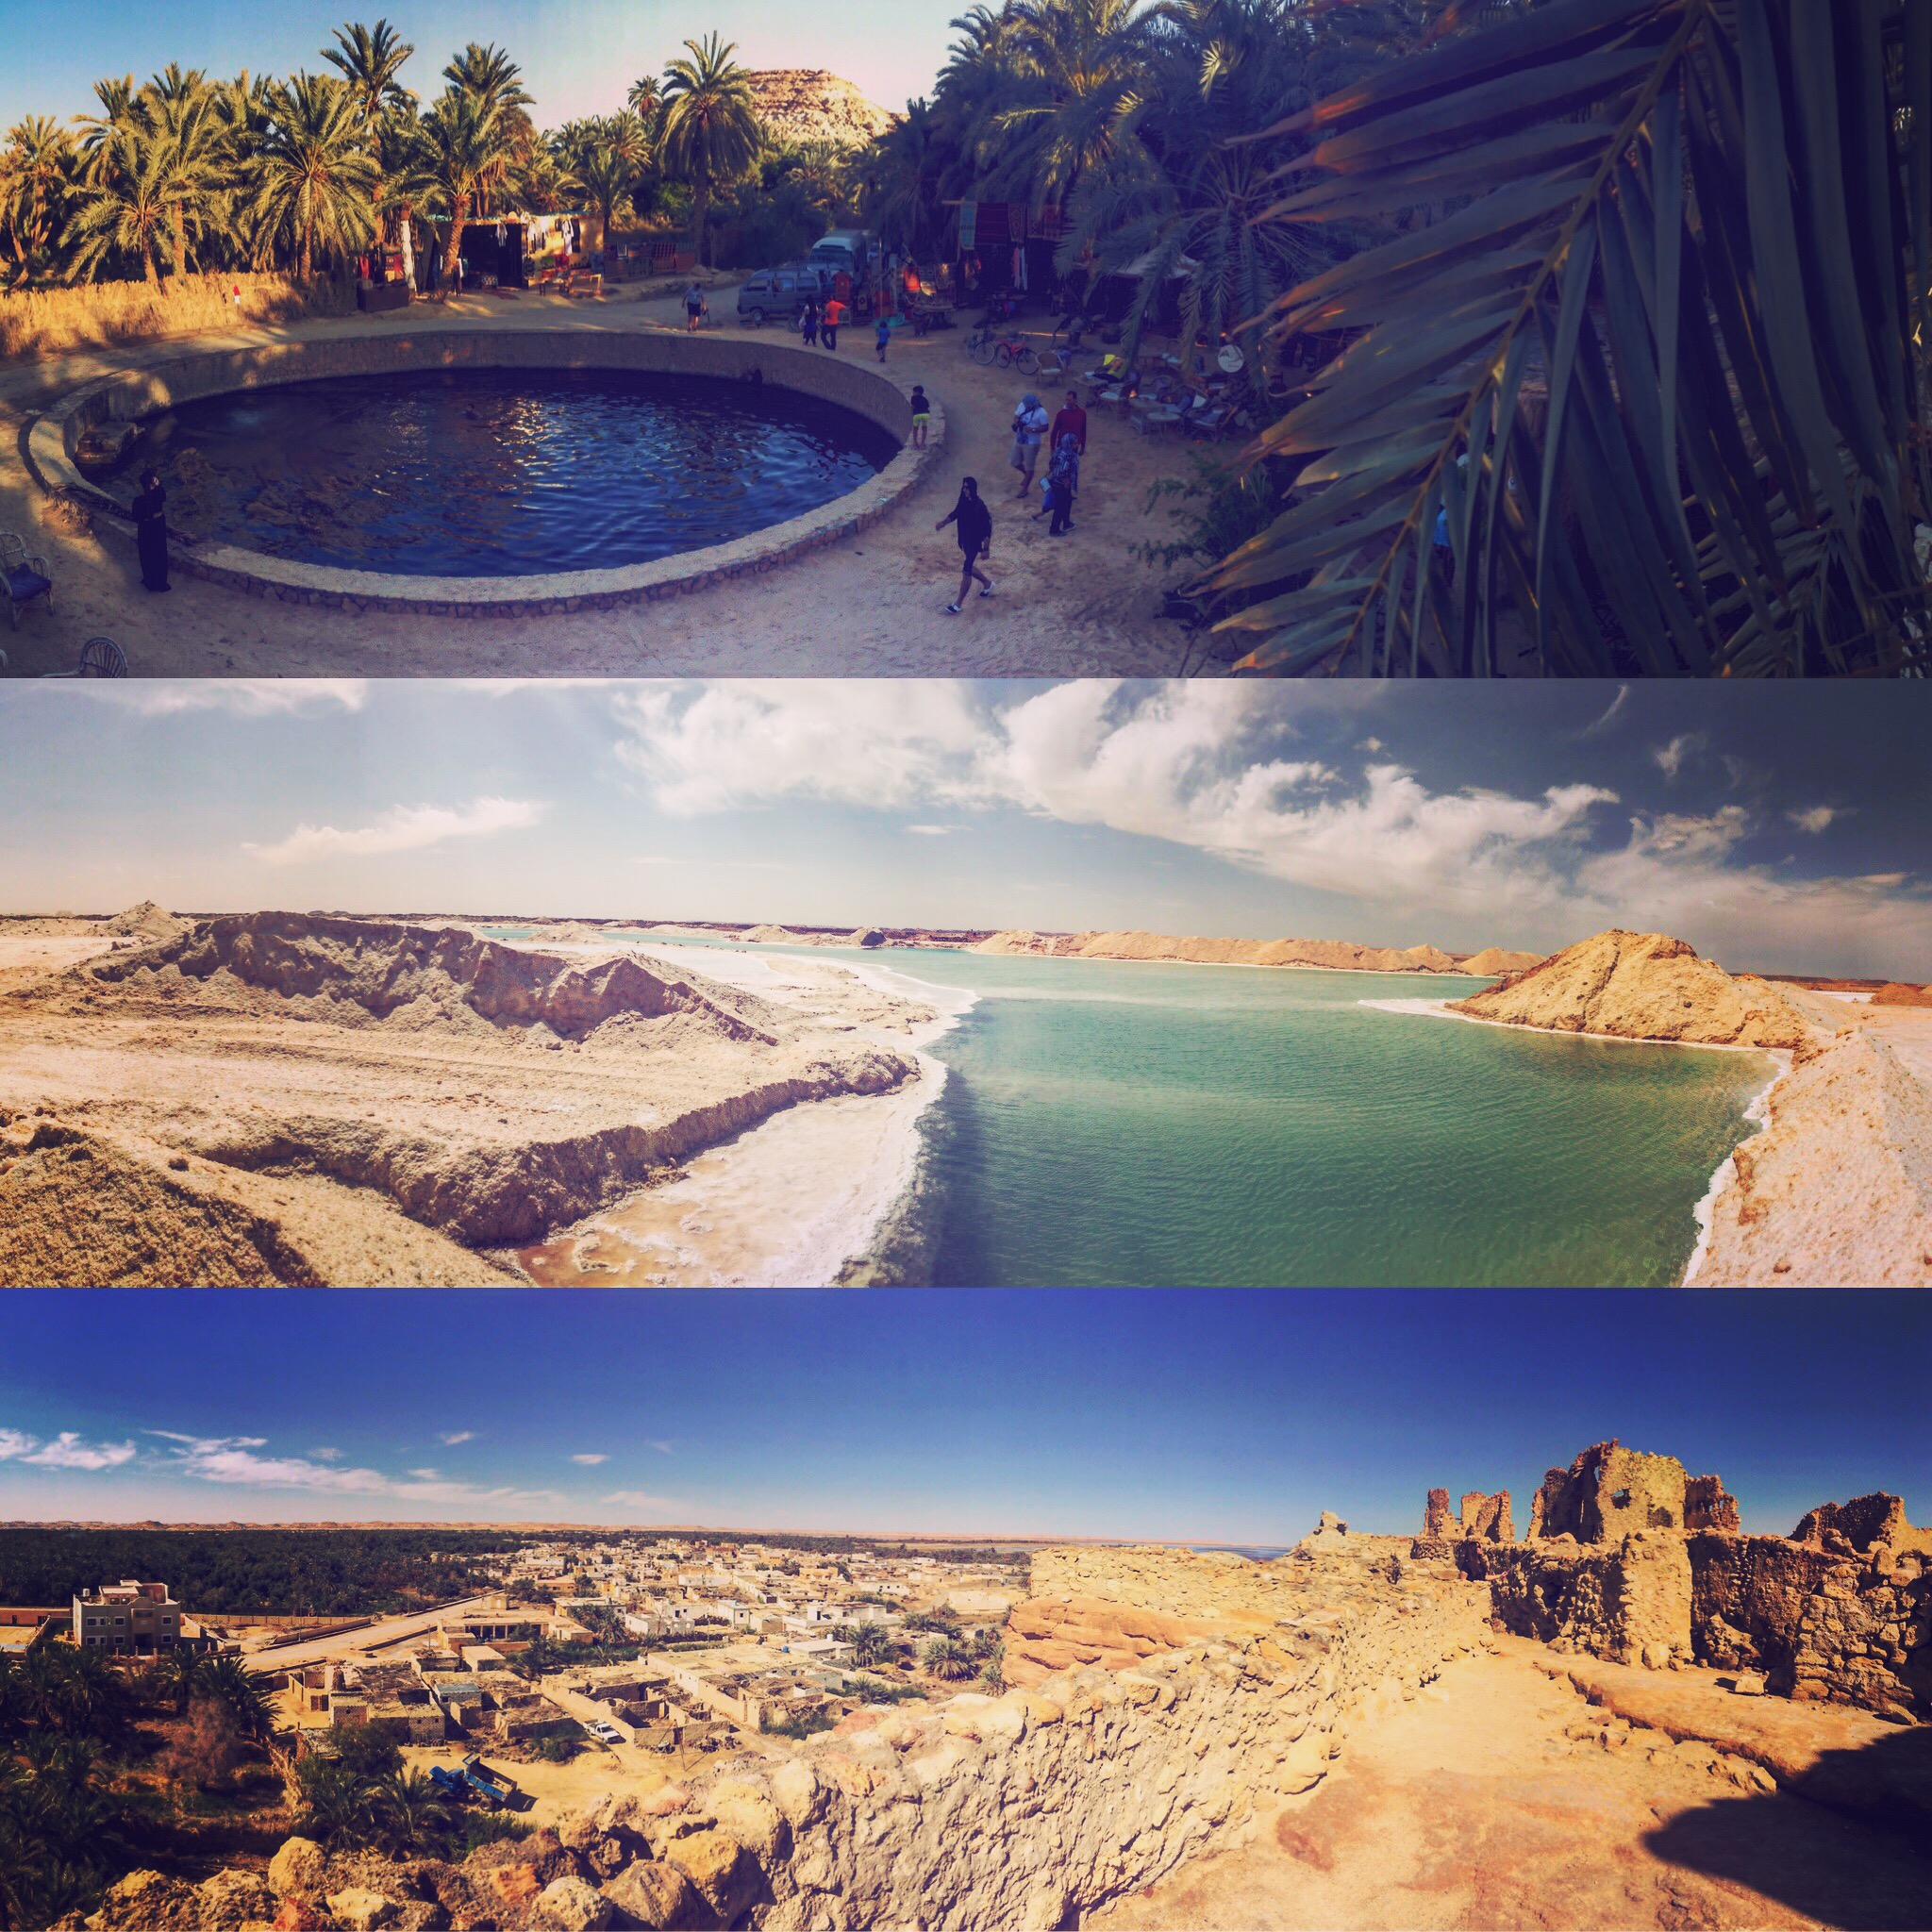 Snippets of Egypt's Siwa Oasis